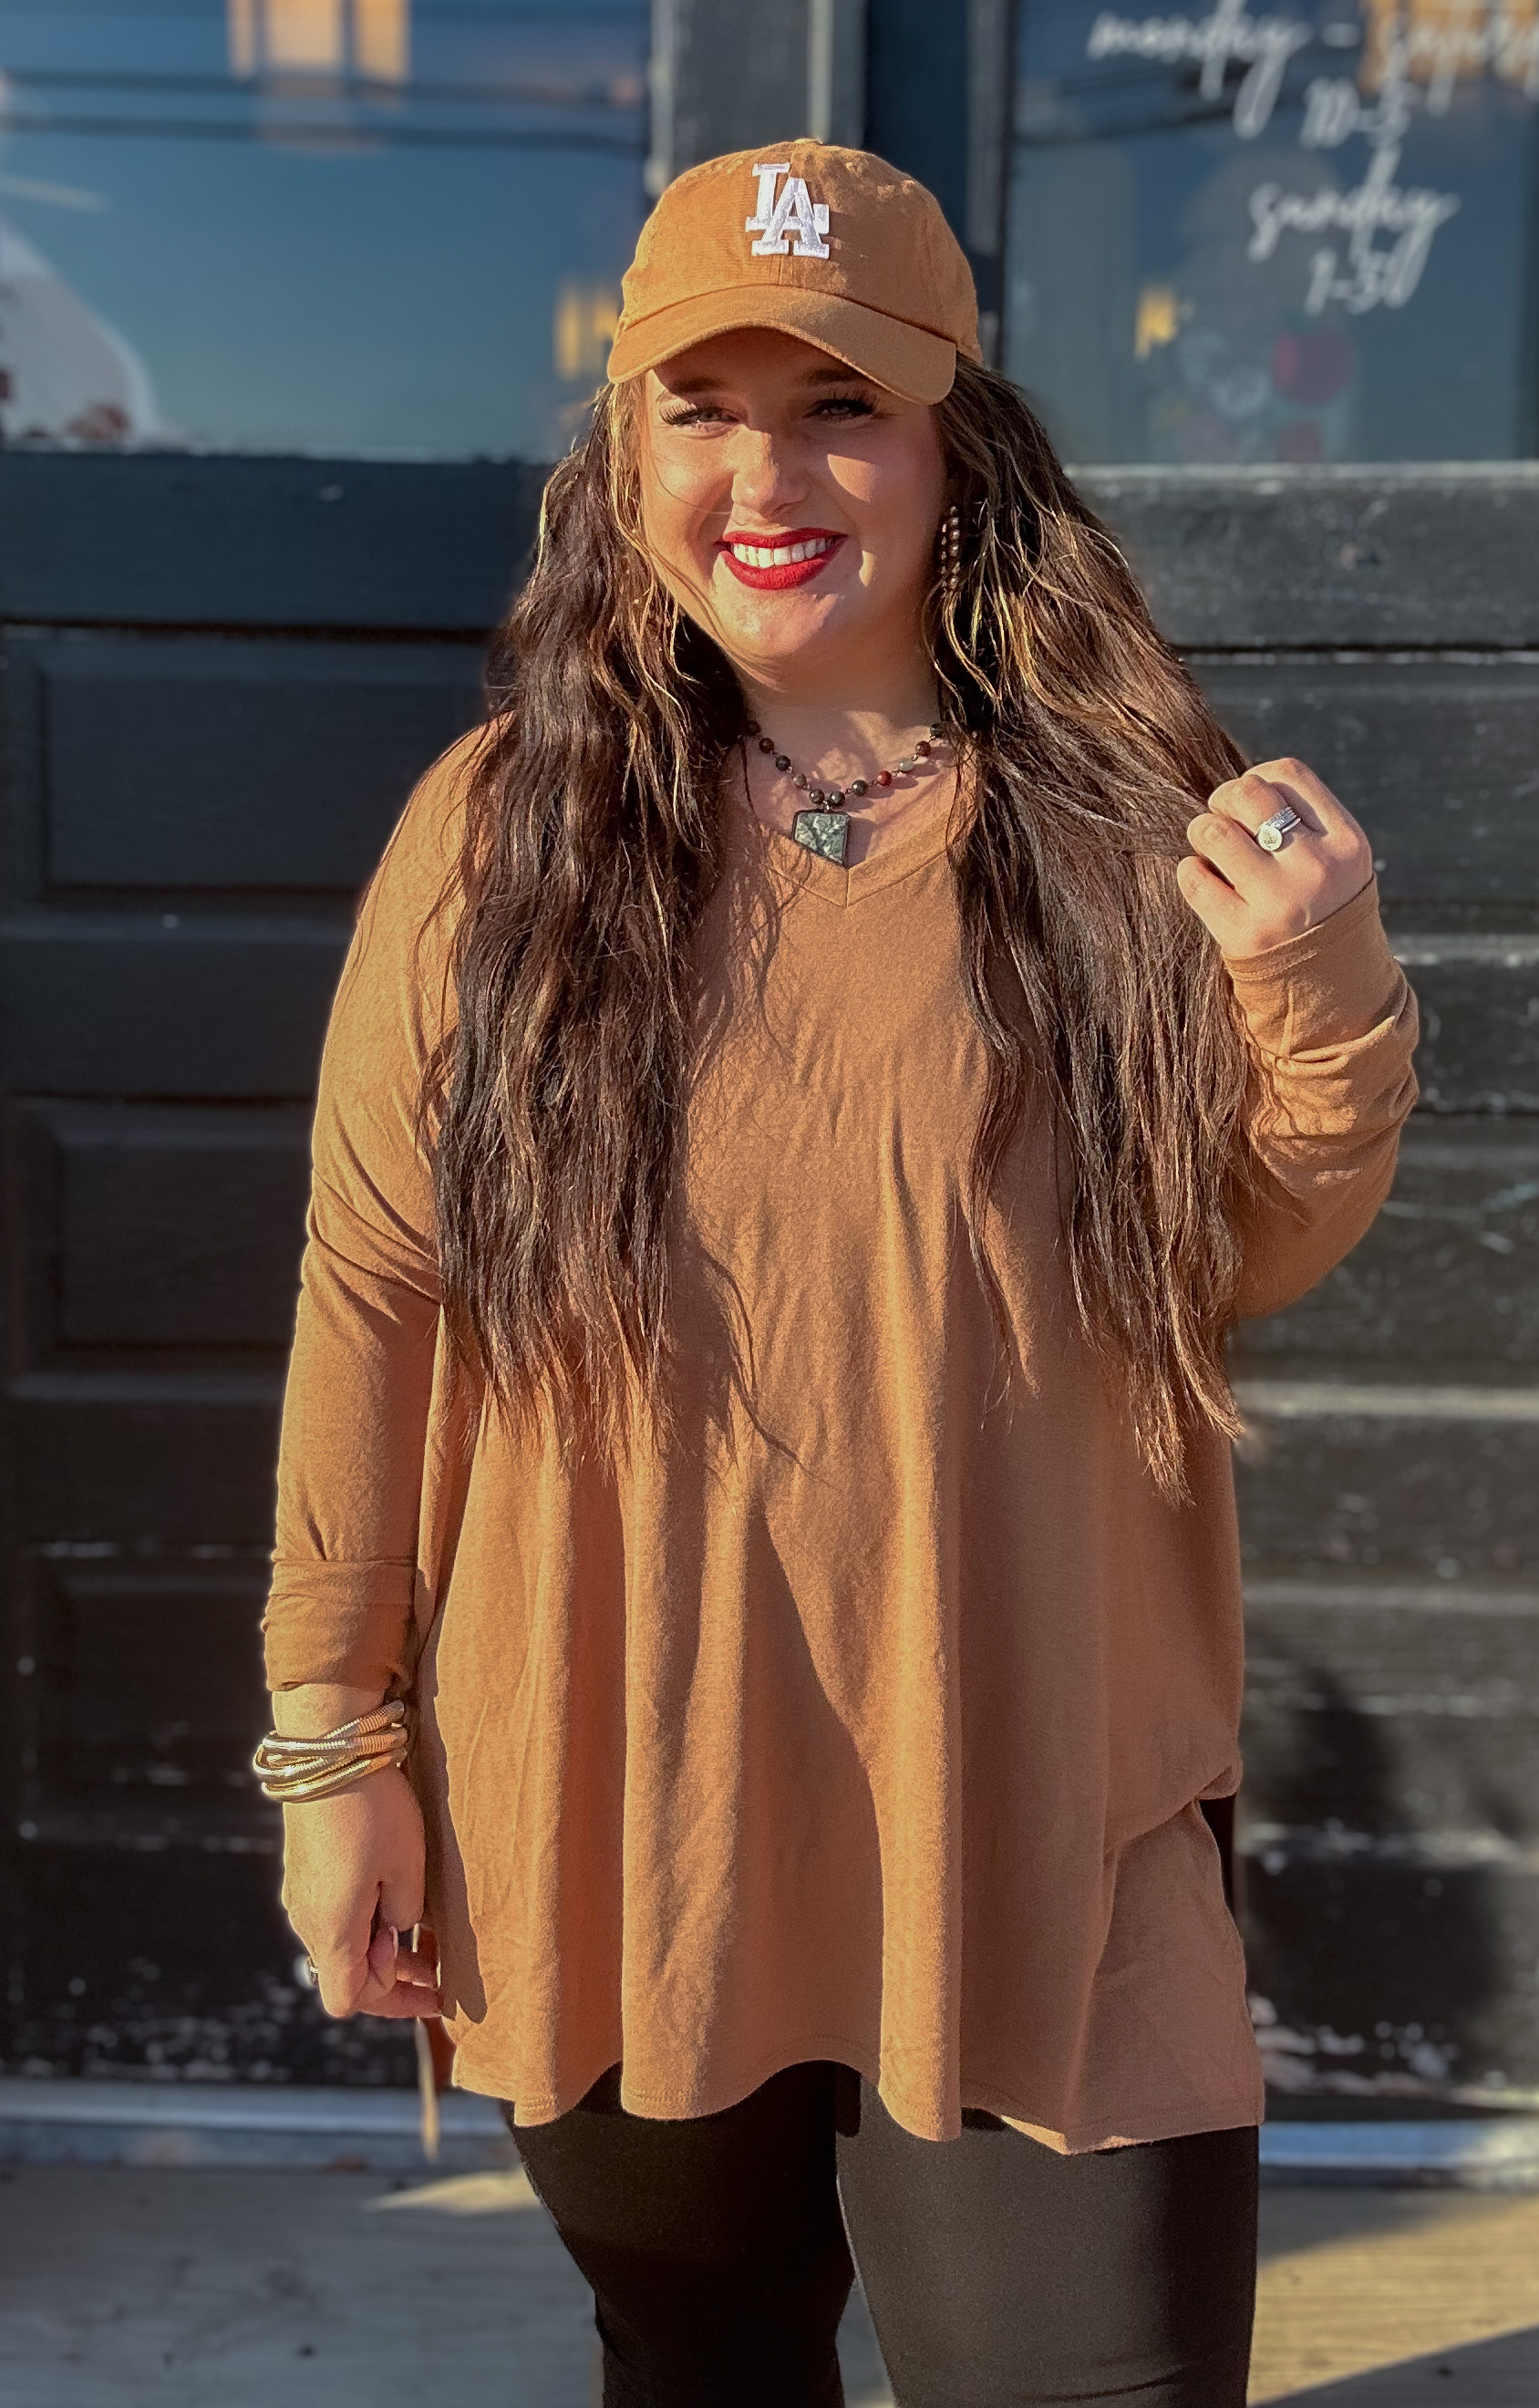 These comfy long sleeve tees are perfect for everyday wear! Dress them up or dress them down, and stay comfy! Perfect for Fall!
Colors: Black, Mocha, Camel
1X through 3X. Madison is wearing a 1X.